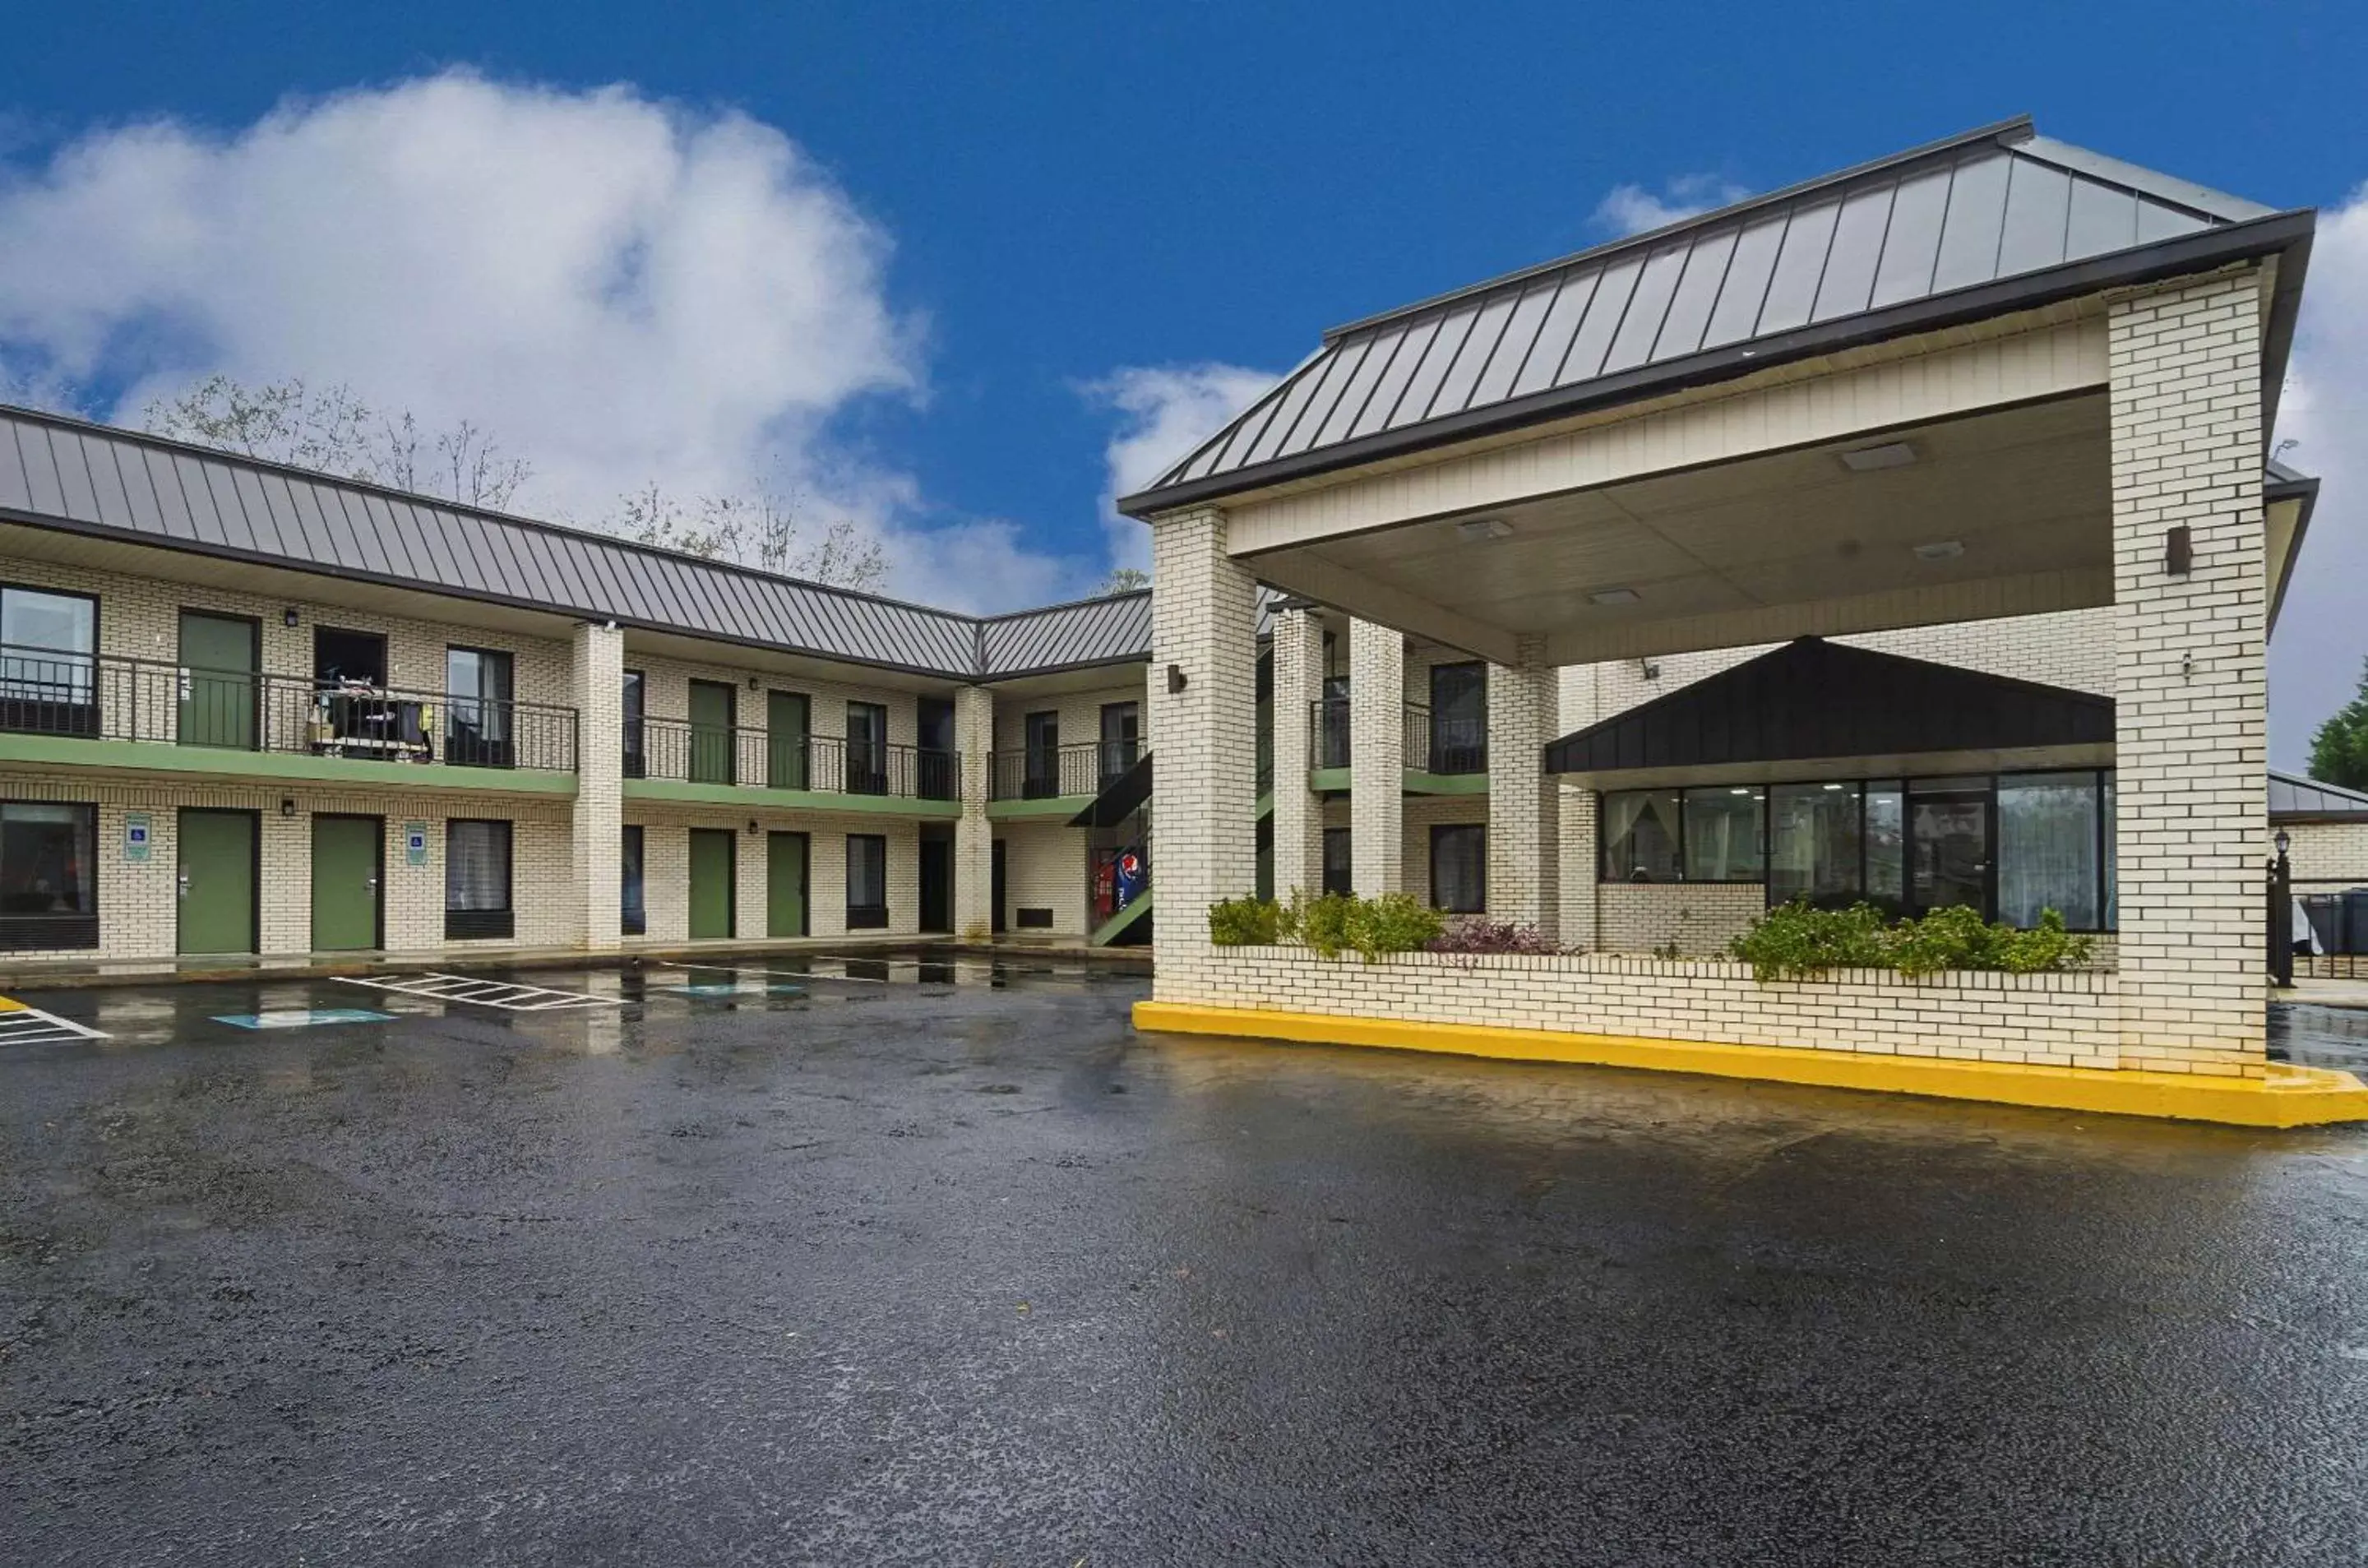 Property building in Quality Inn Raeford